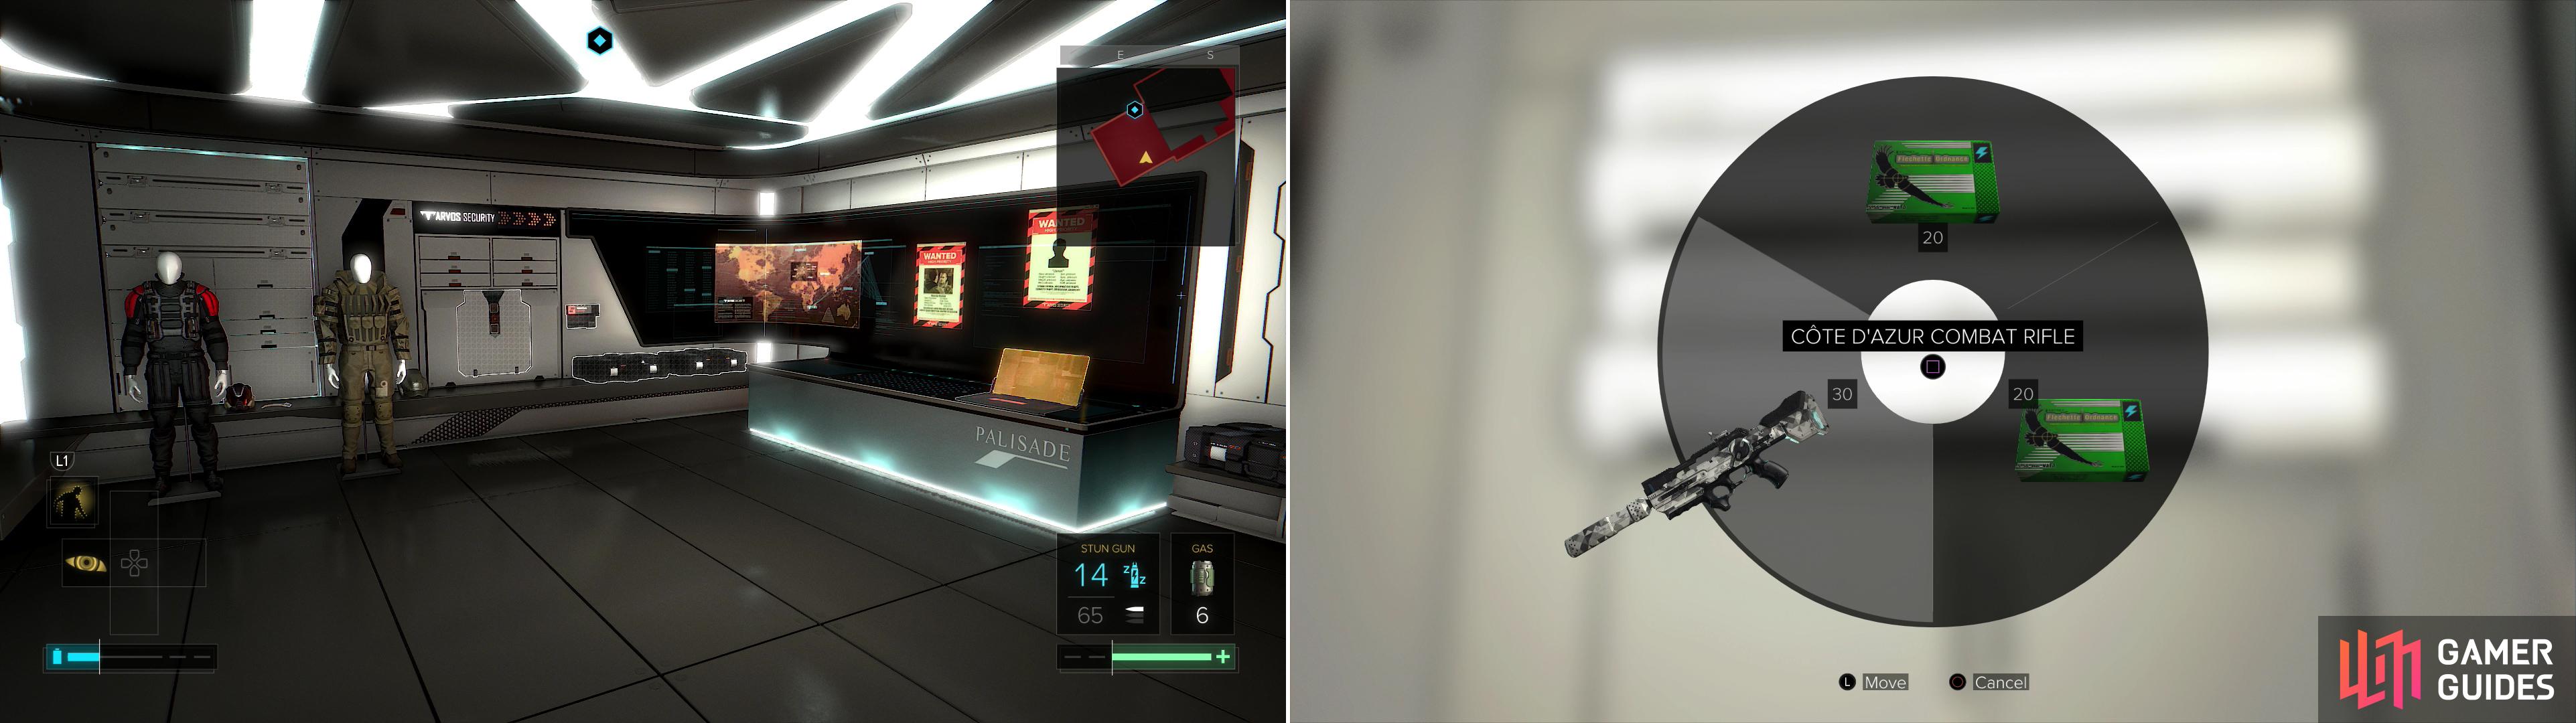 Behold, the Tarvos Security vault (left), inside of which you'll find various goodies including the Cote d'Azur Combat Rifle (right).